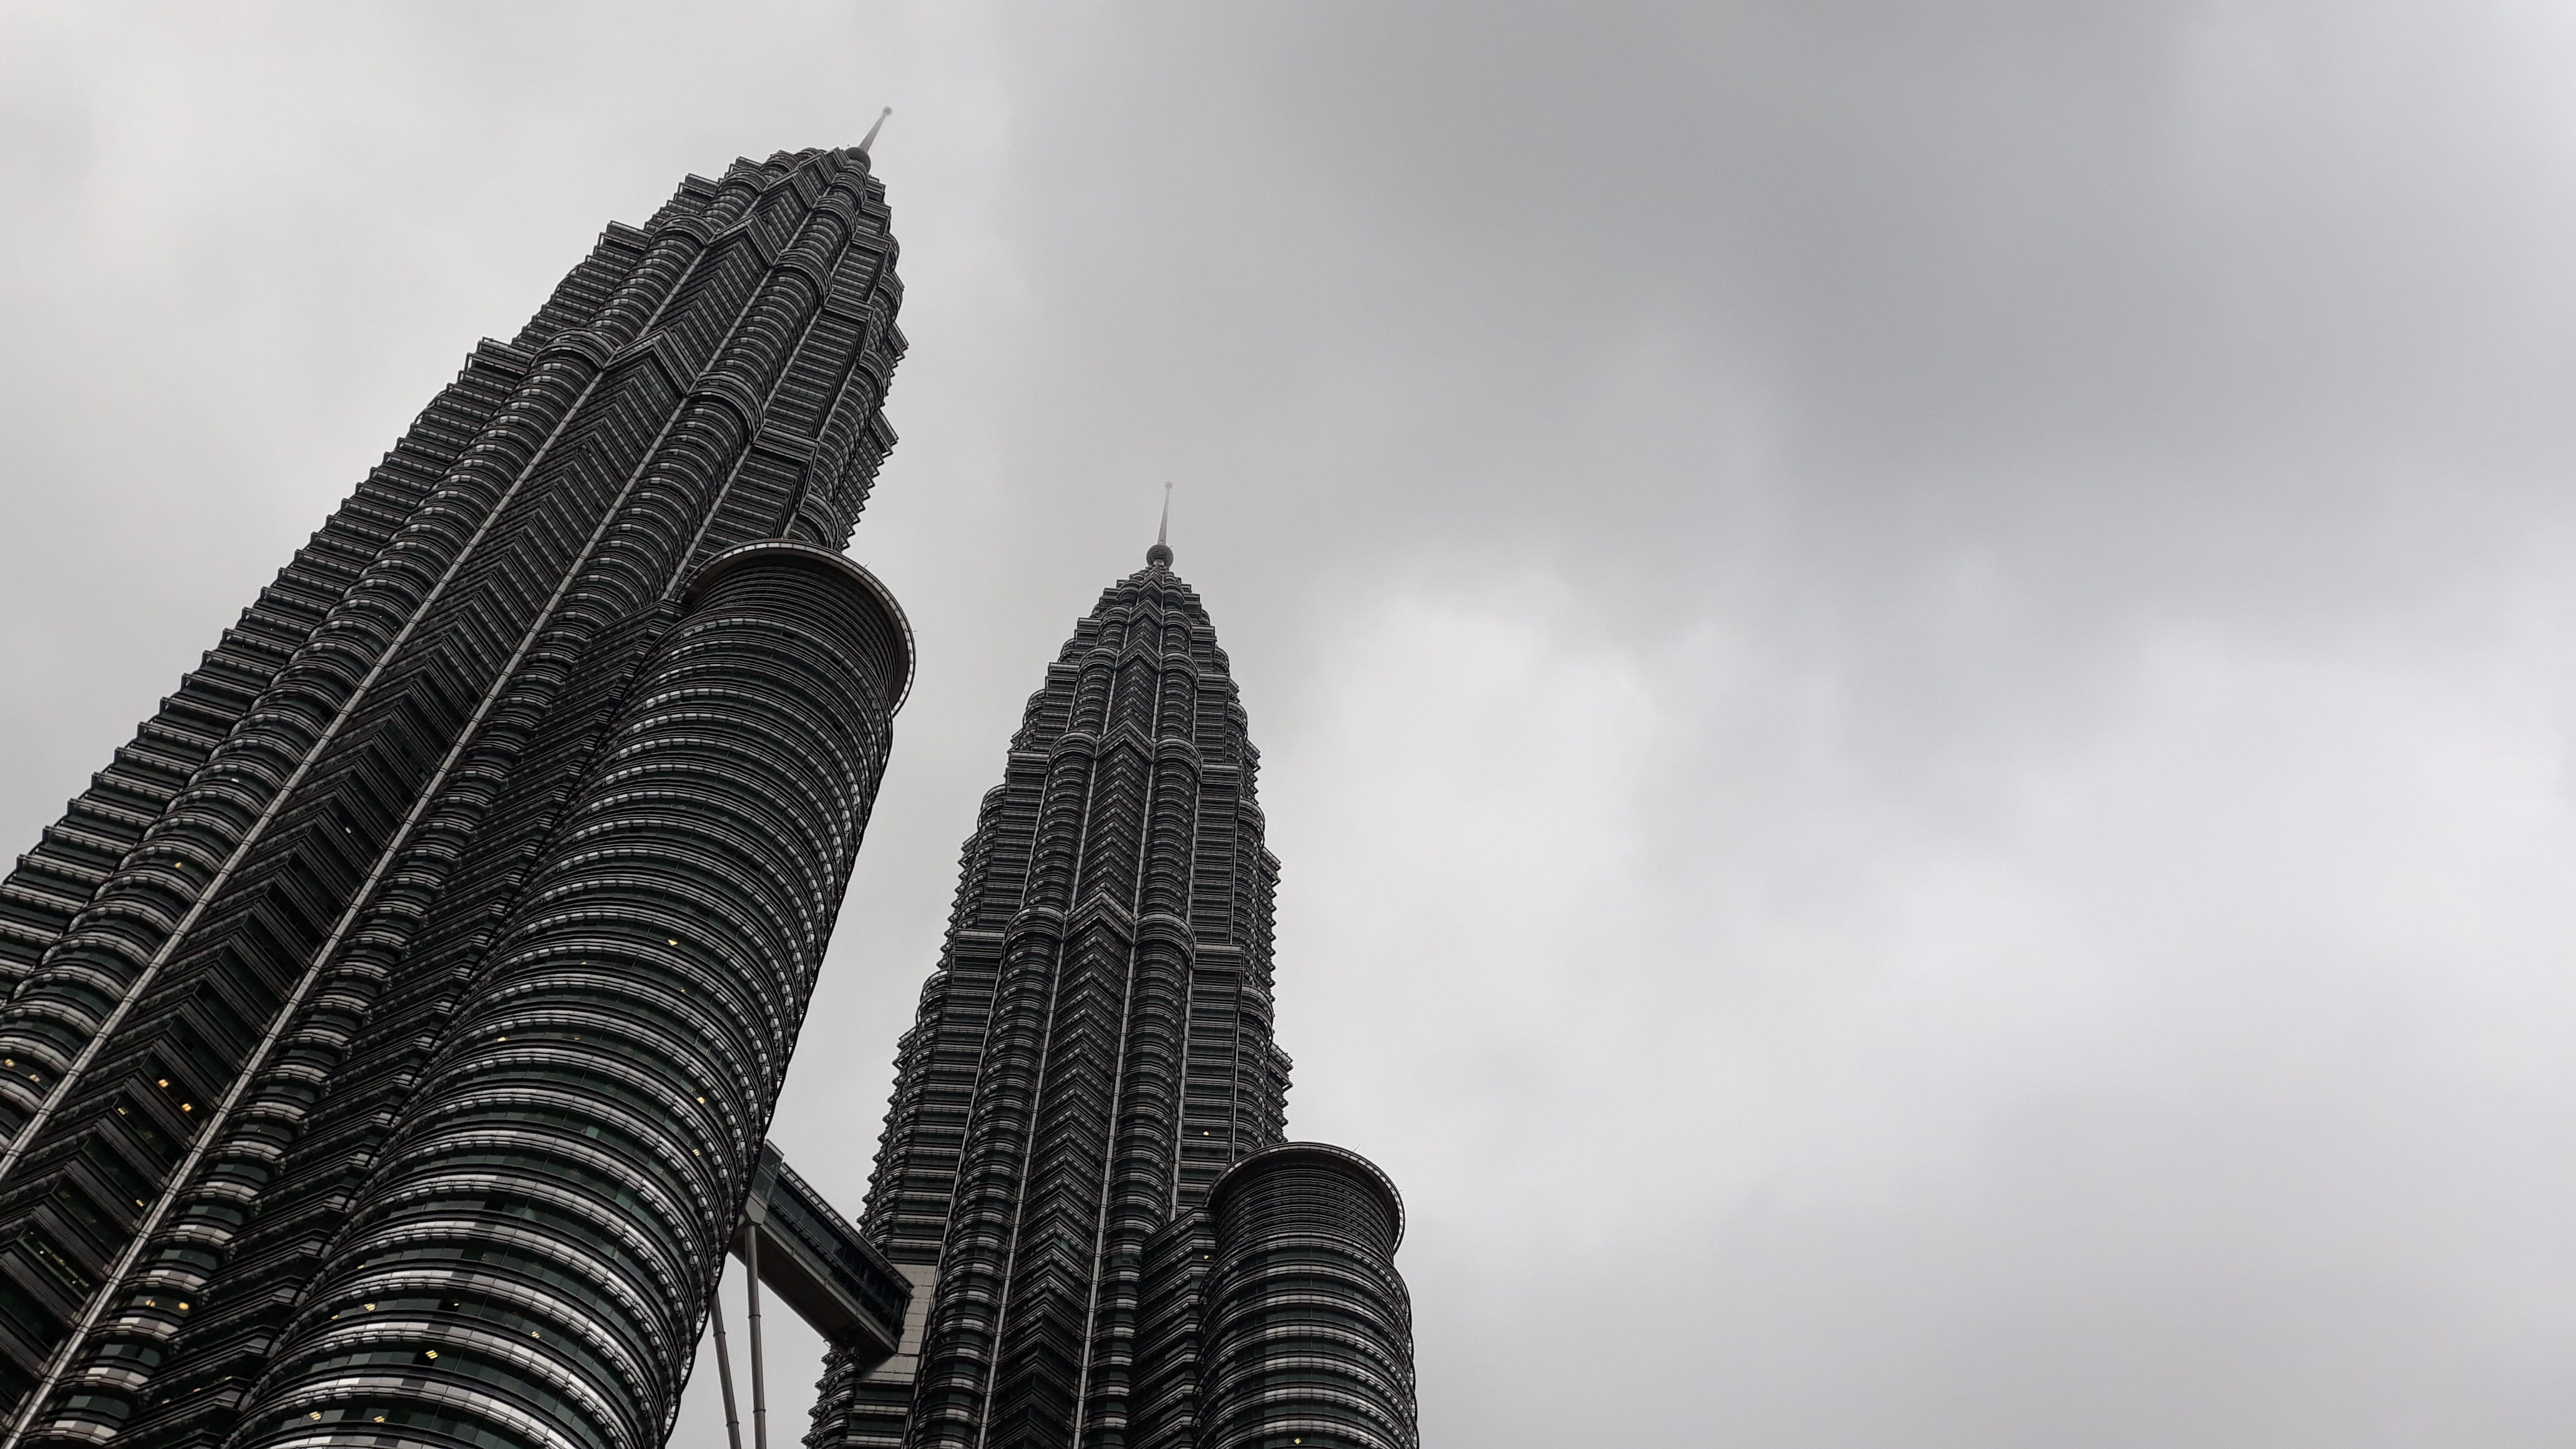 low angle photography of Petronas Tower in Malaysia, klcc, tall